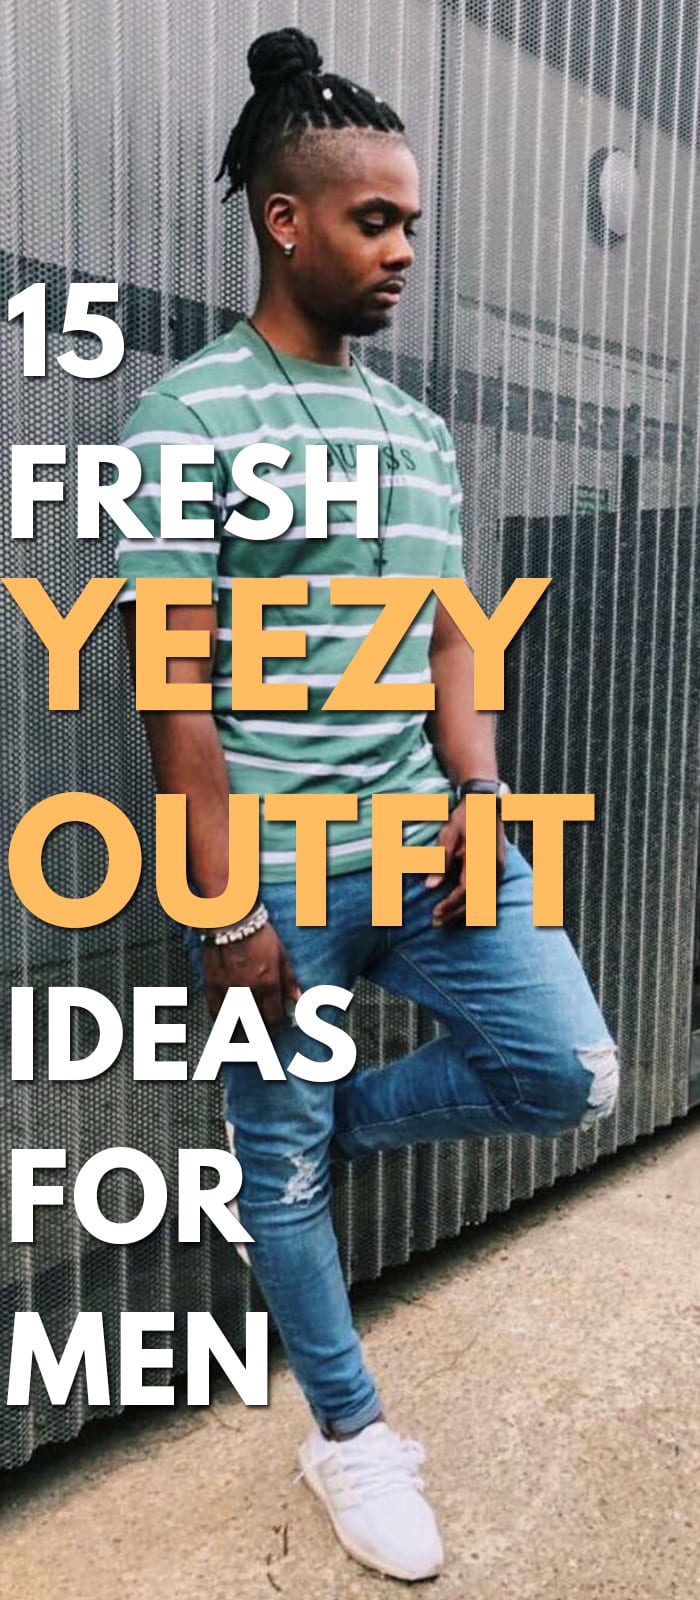 15 Fresh Yeezy Outfit Ideas For Men